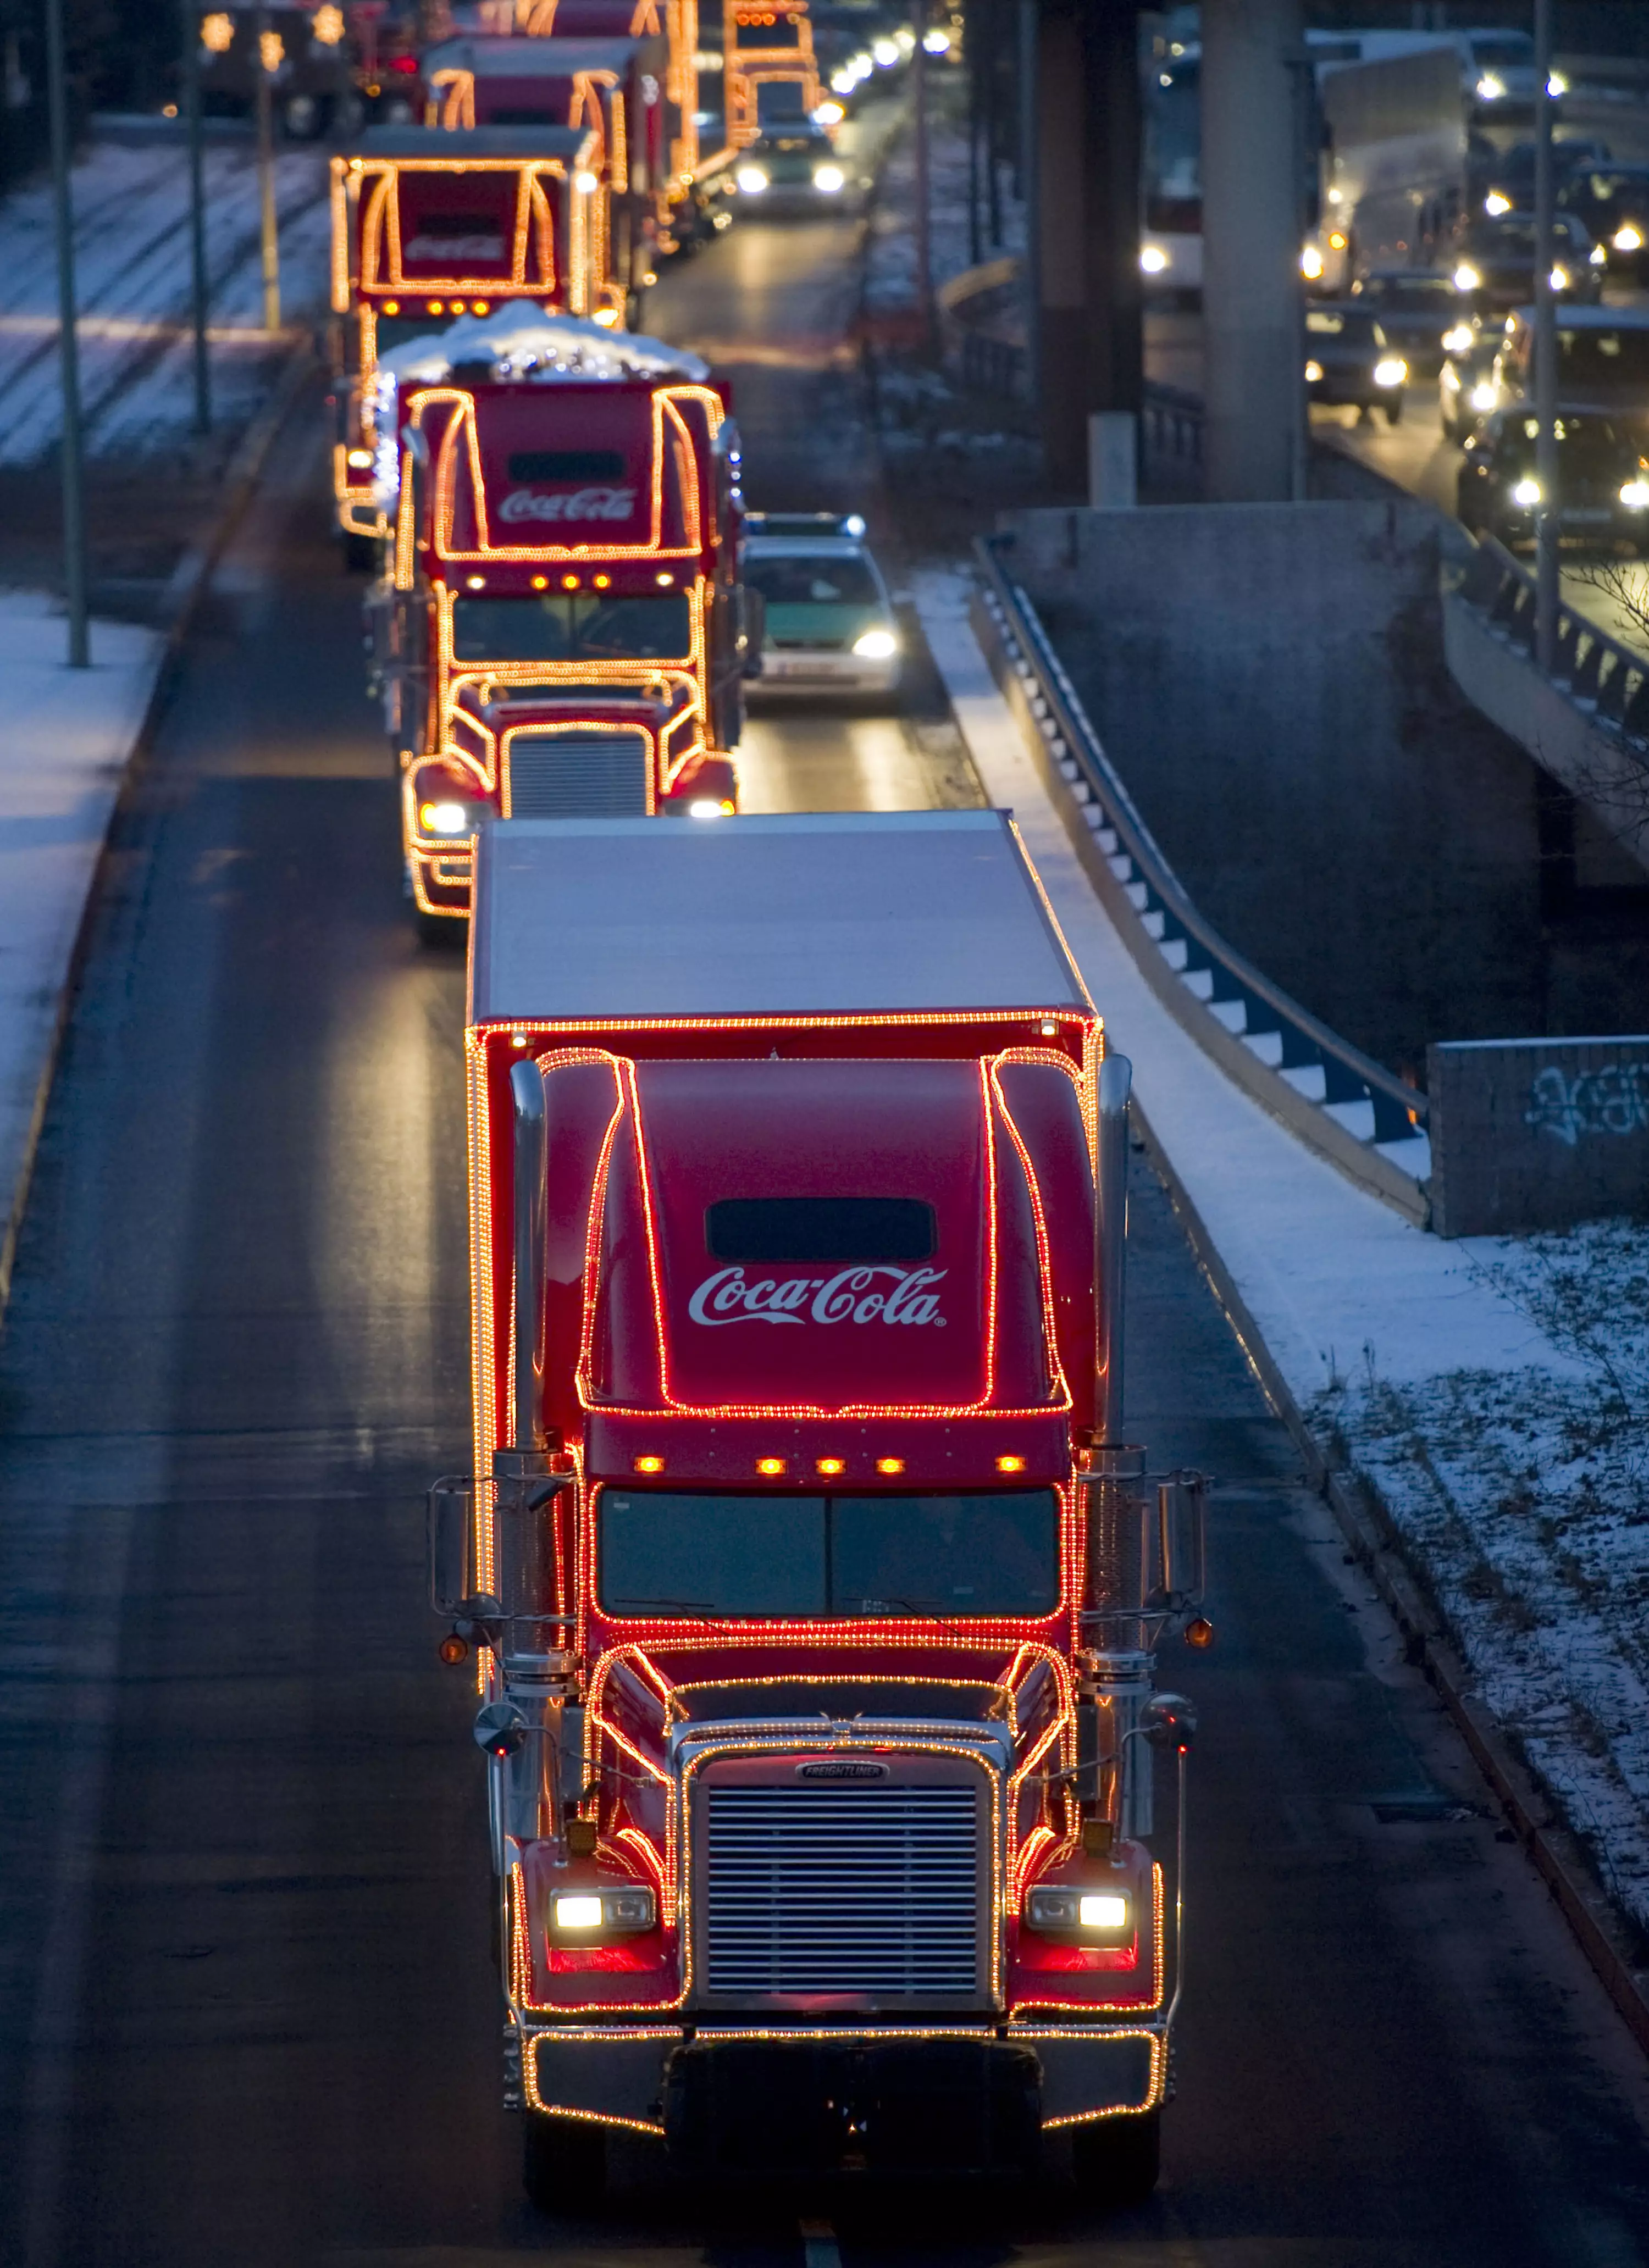 Just a mere glimpse of the Coca-Cola Truck can bring festive feels. (